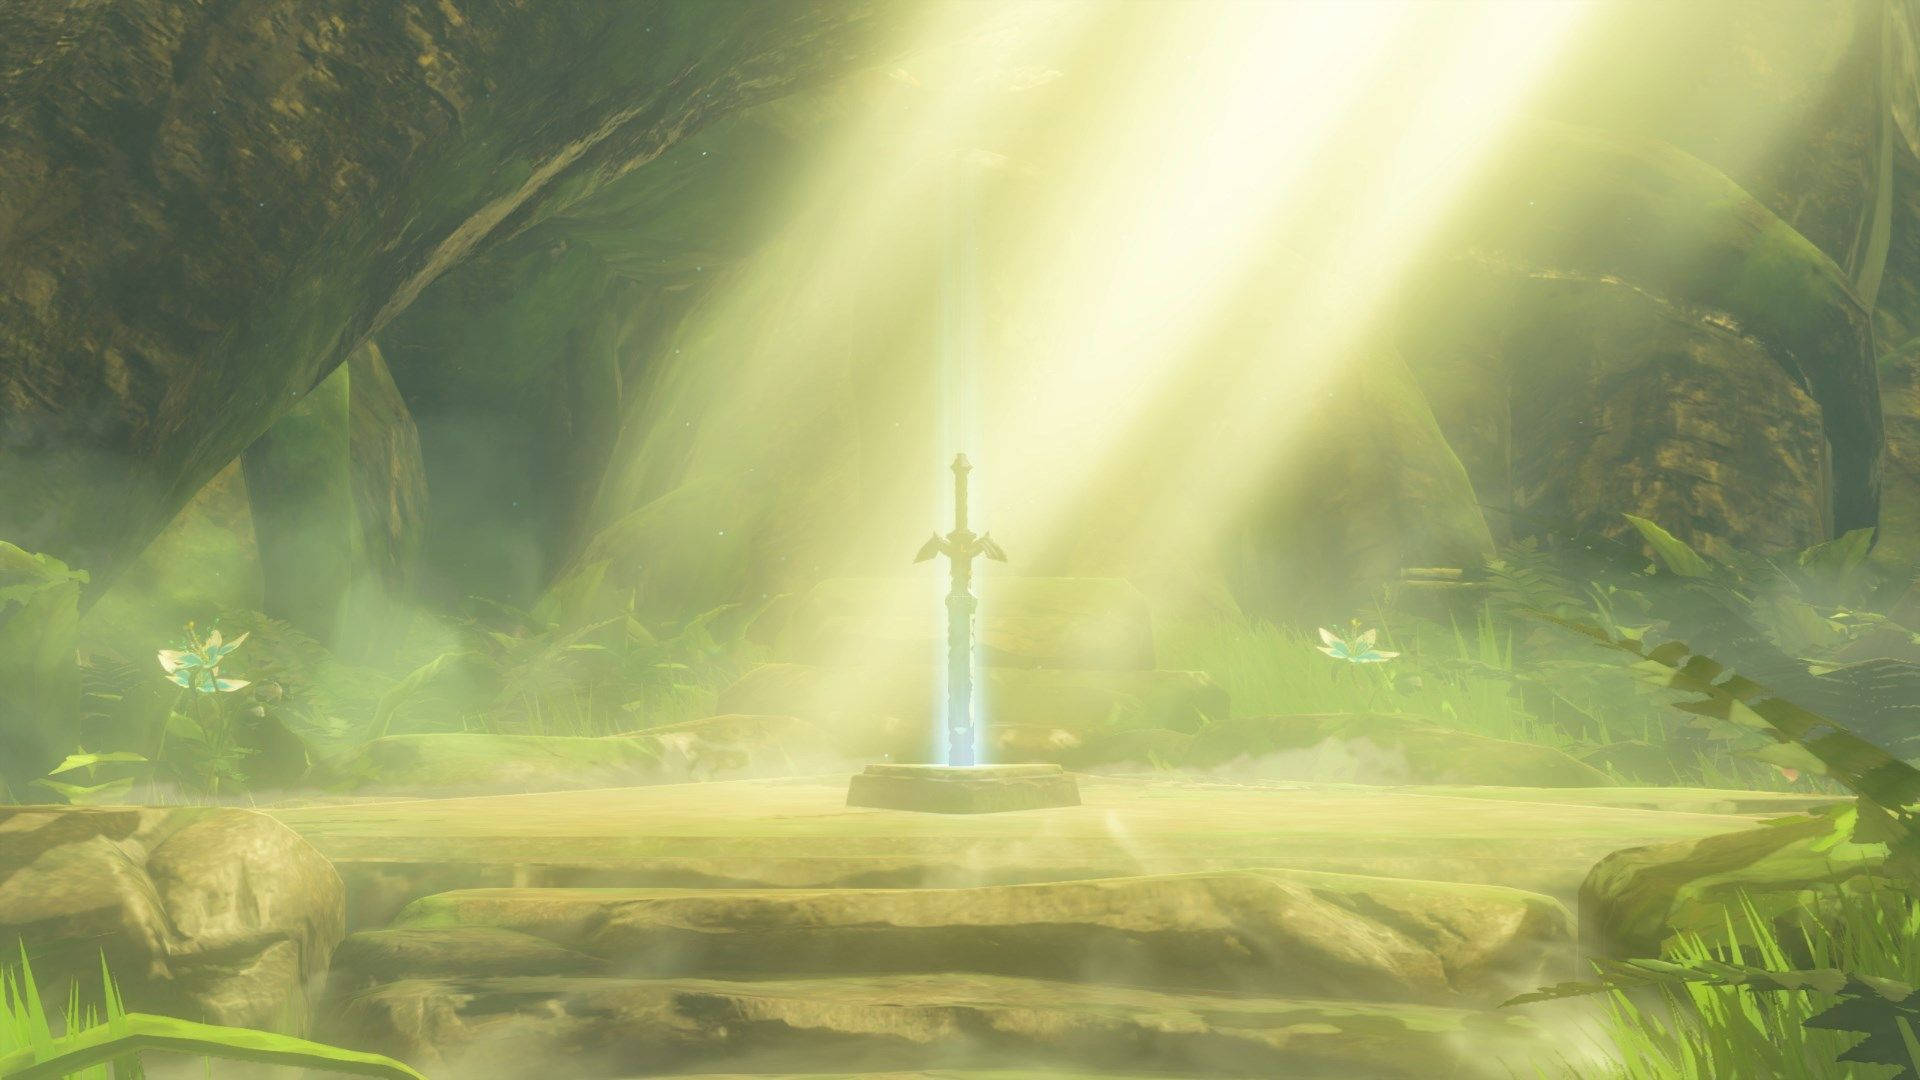 Taking hold of the Master Sword, the iconic Sword of Resurrection in The Legend of Zelda: Breath of the Wild. Wallpaper